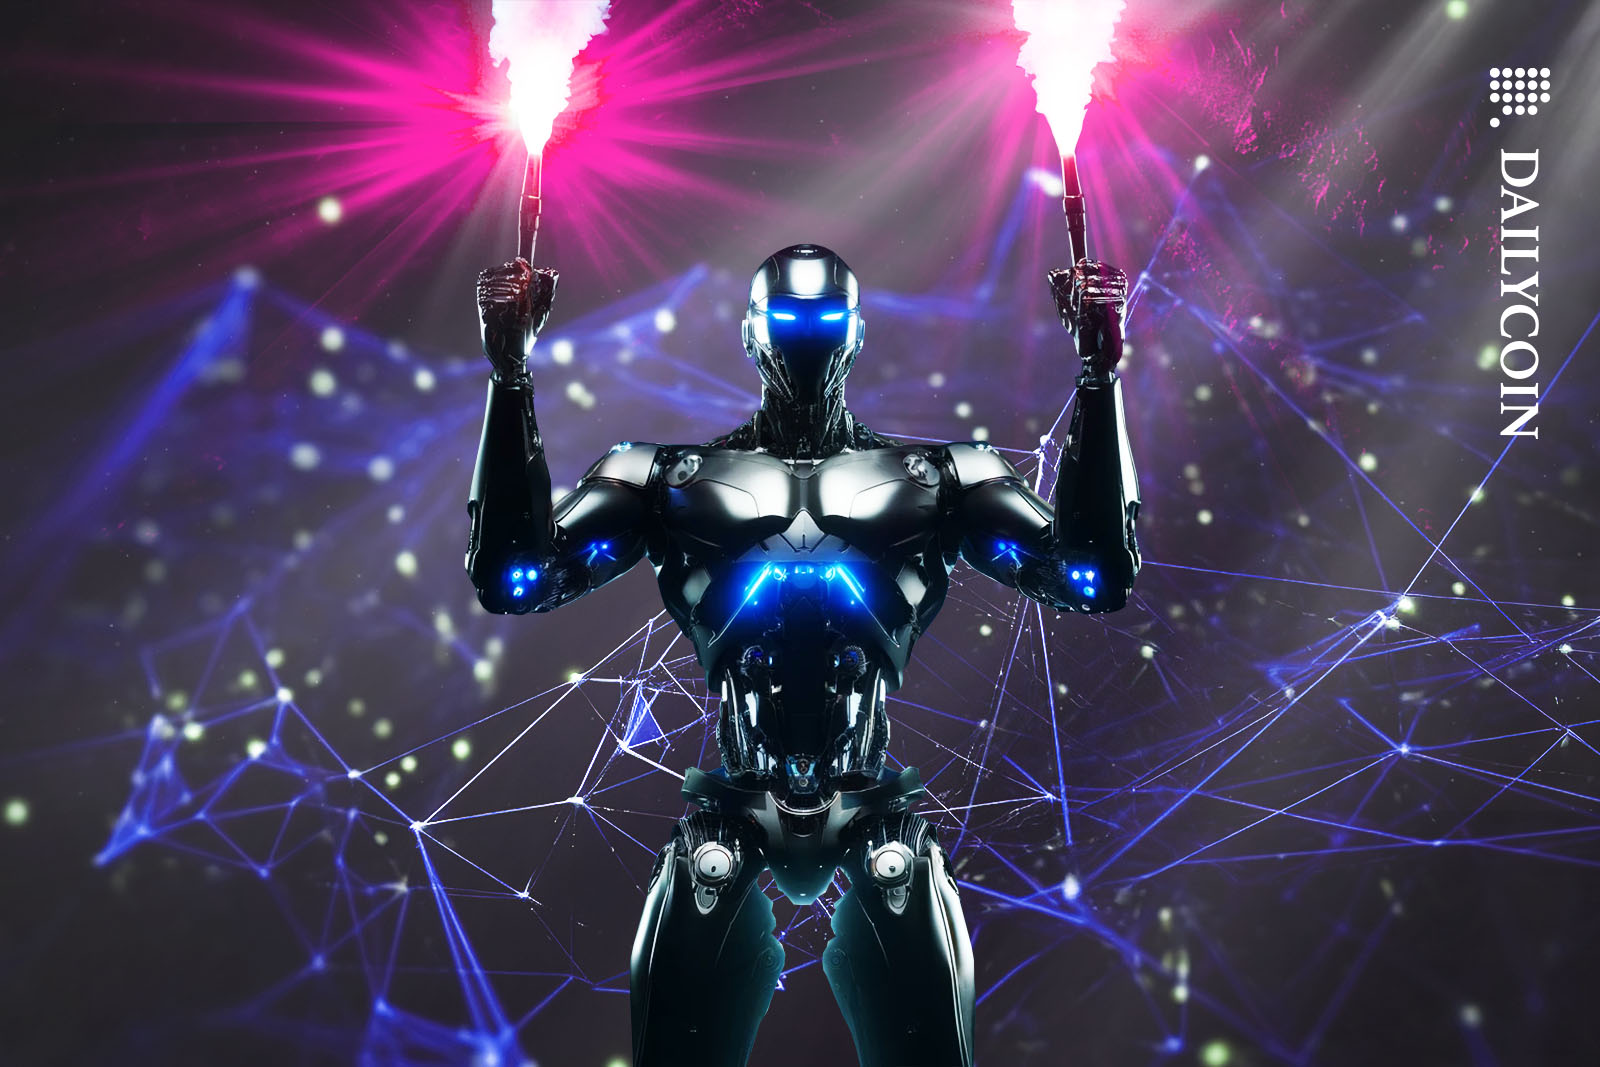 Robot holding up two flares in a digital environment.